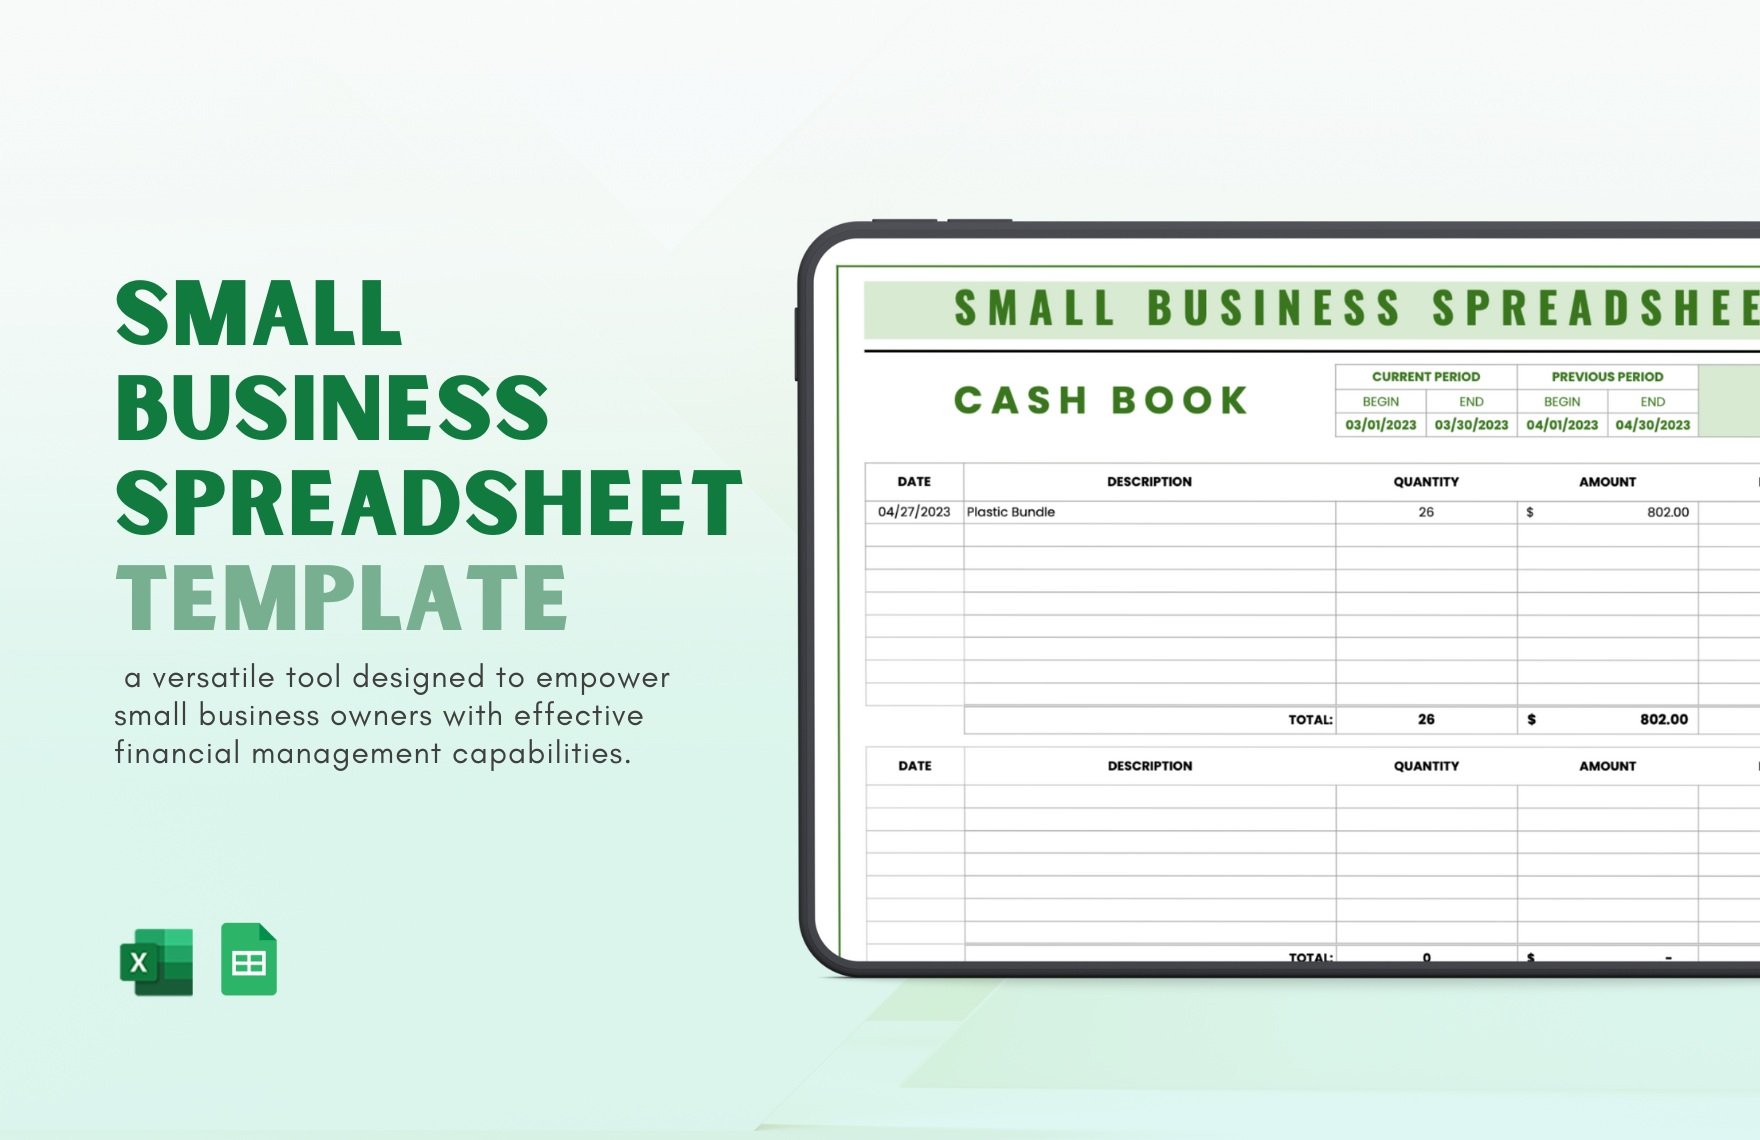 Small Business Spreadsheet Template